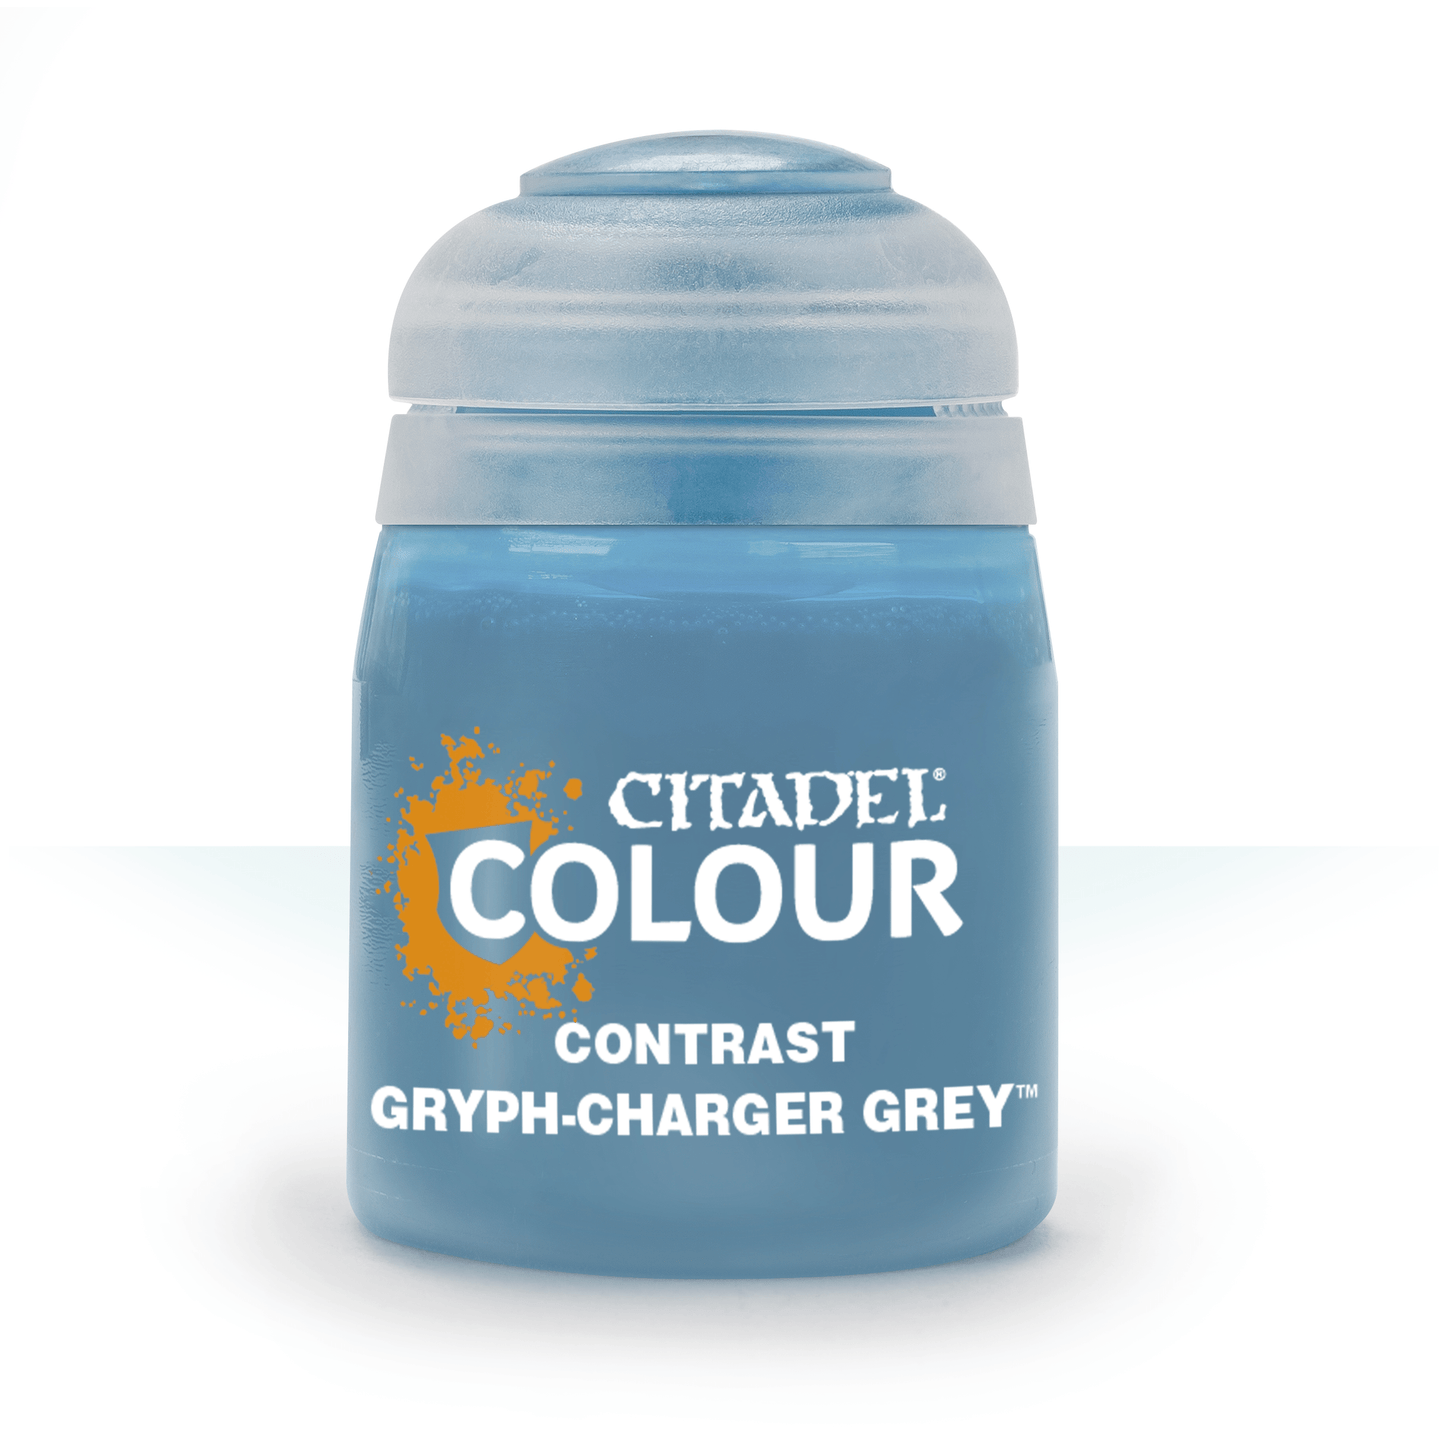 GRYPH-CHARGER GREY (CITADEL CONTRAST PAINT)